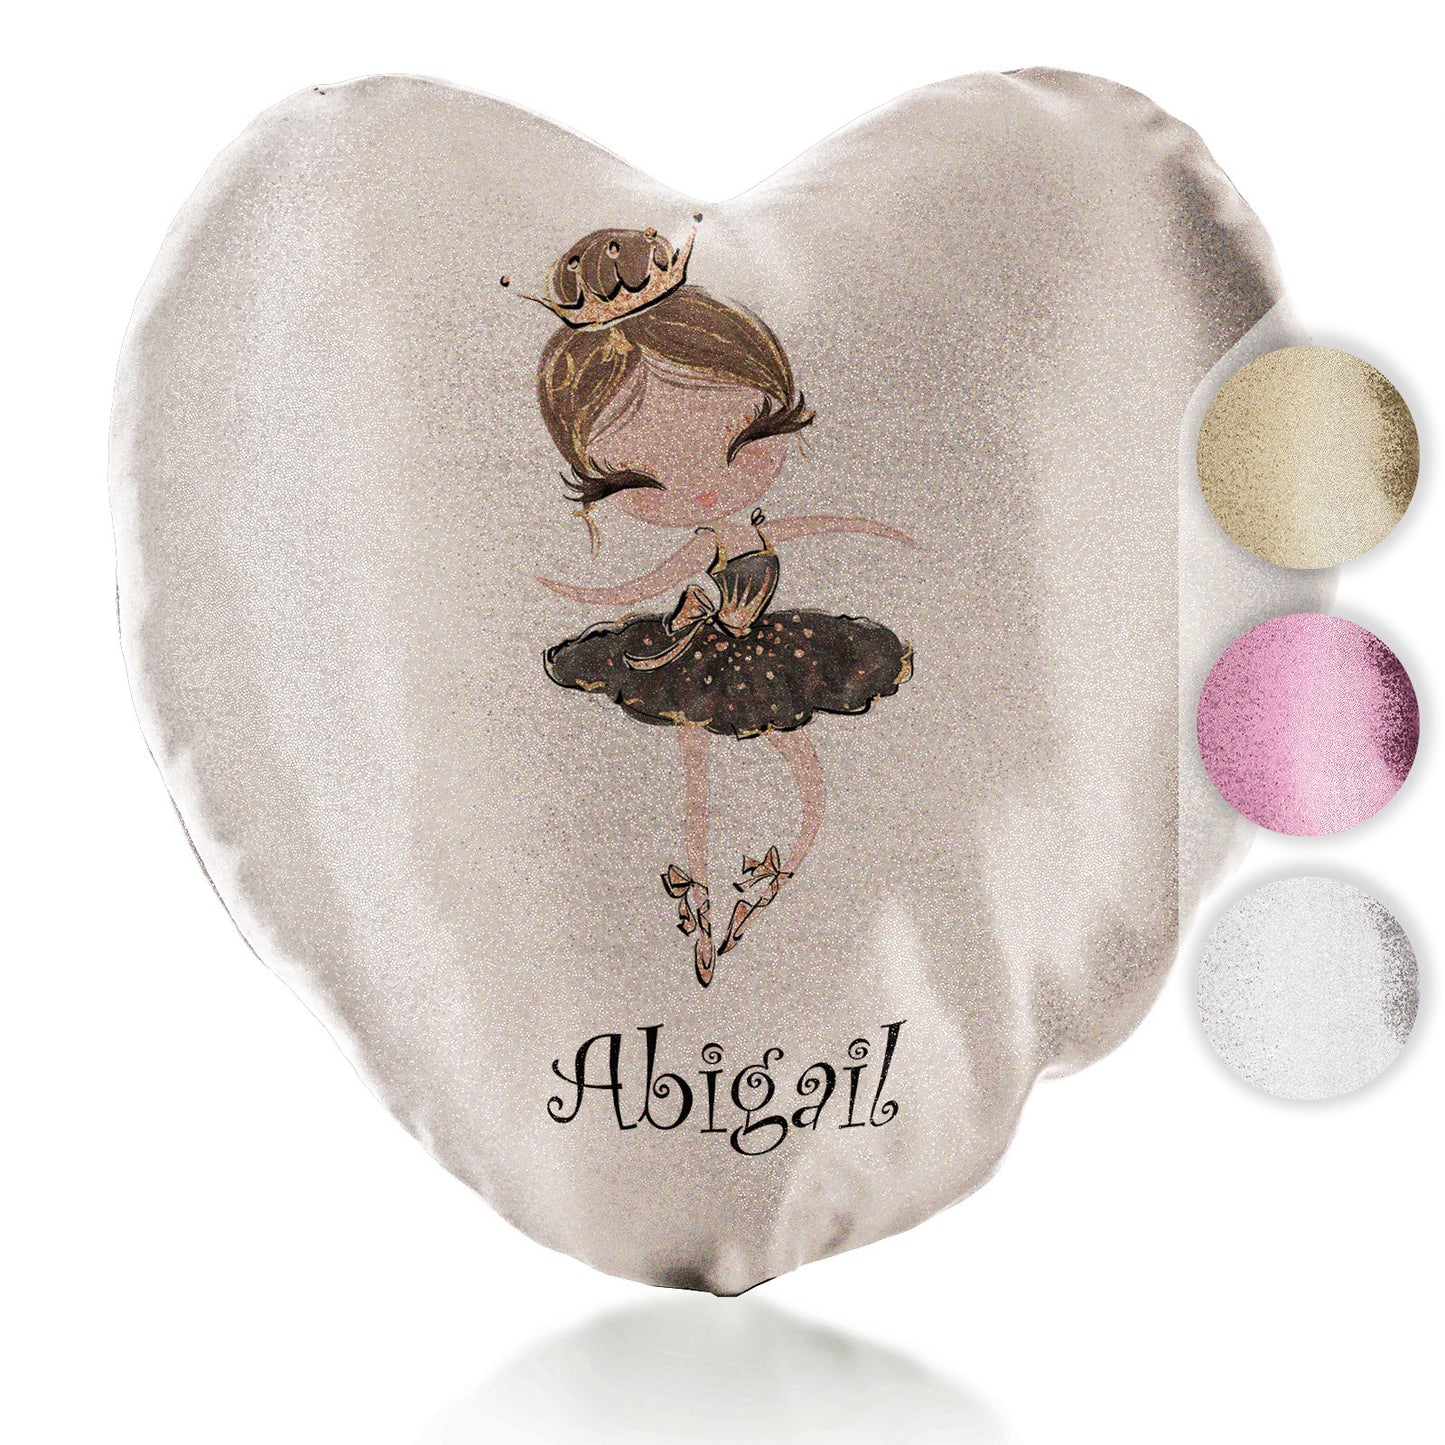 Personalised Glitter Heart Cushion with Cute Text and Light Brown Hair Black Dress Tiara Ballerina